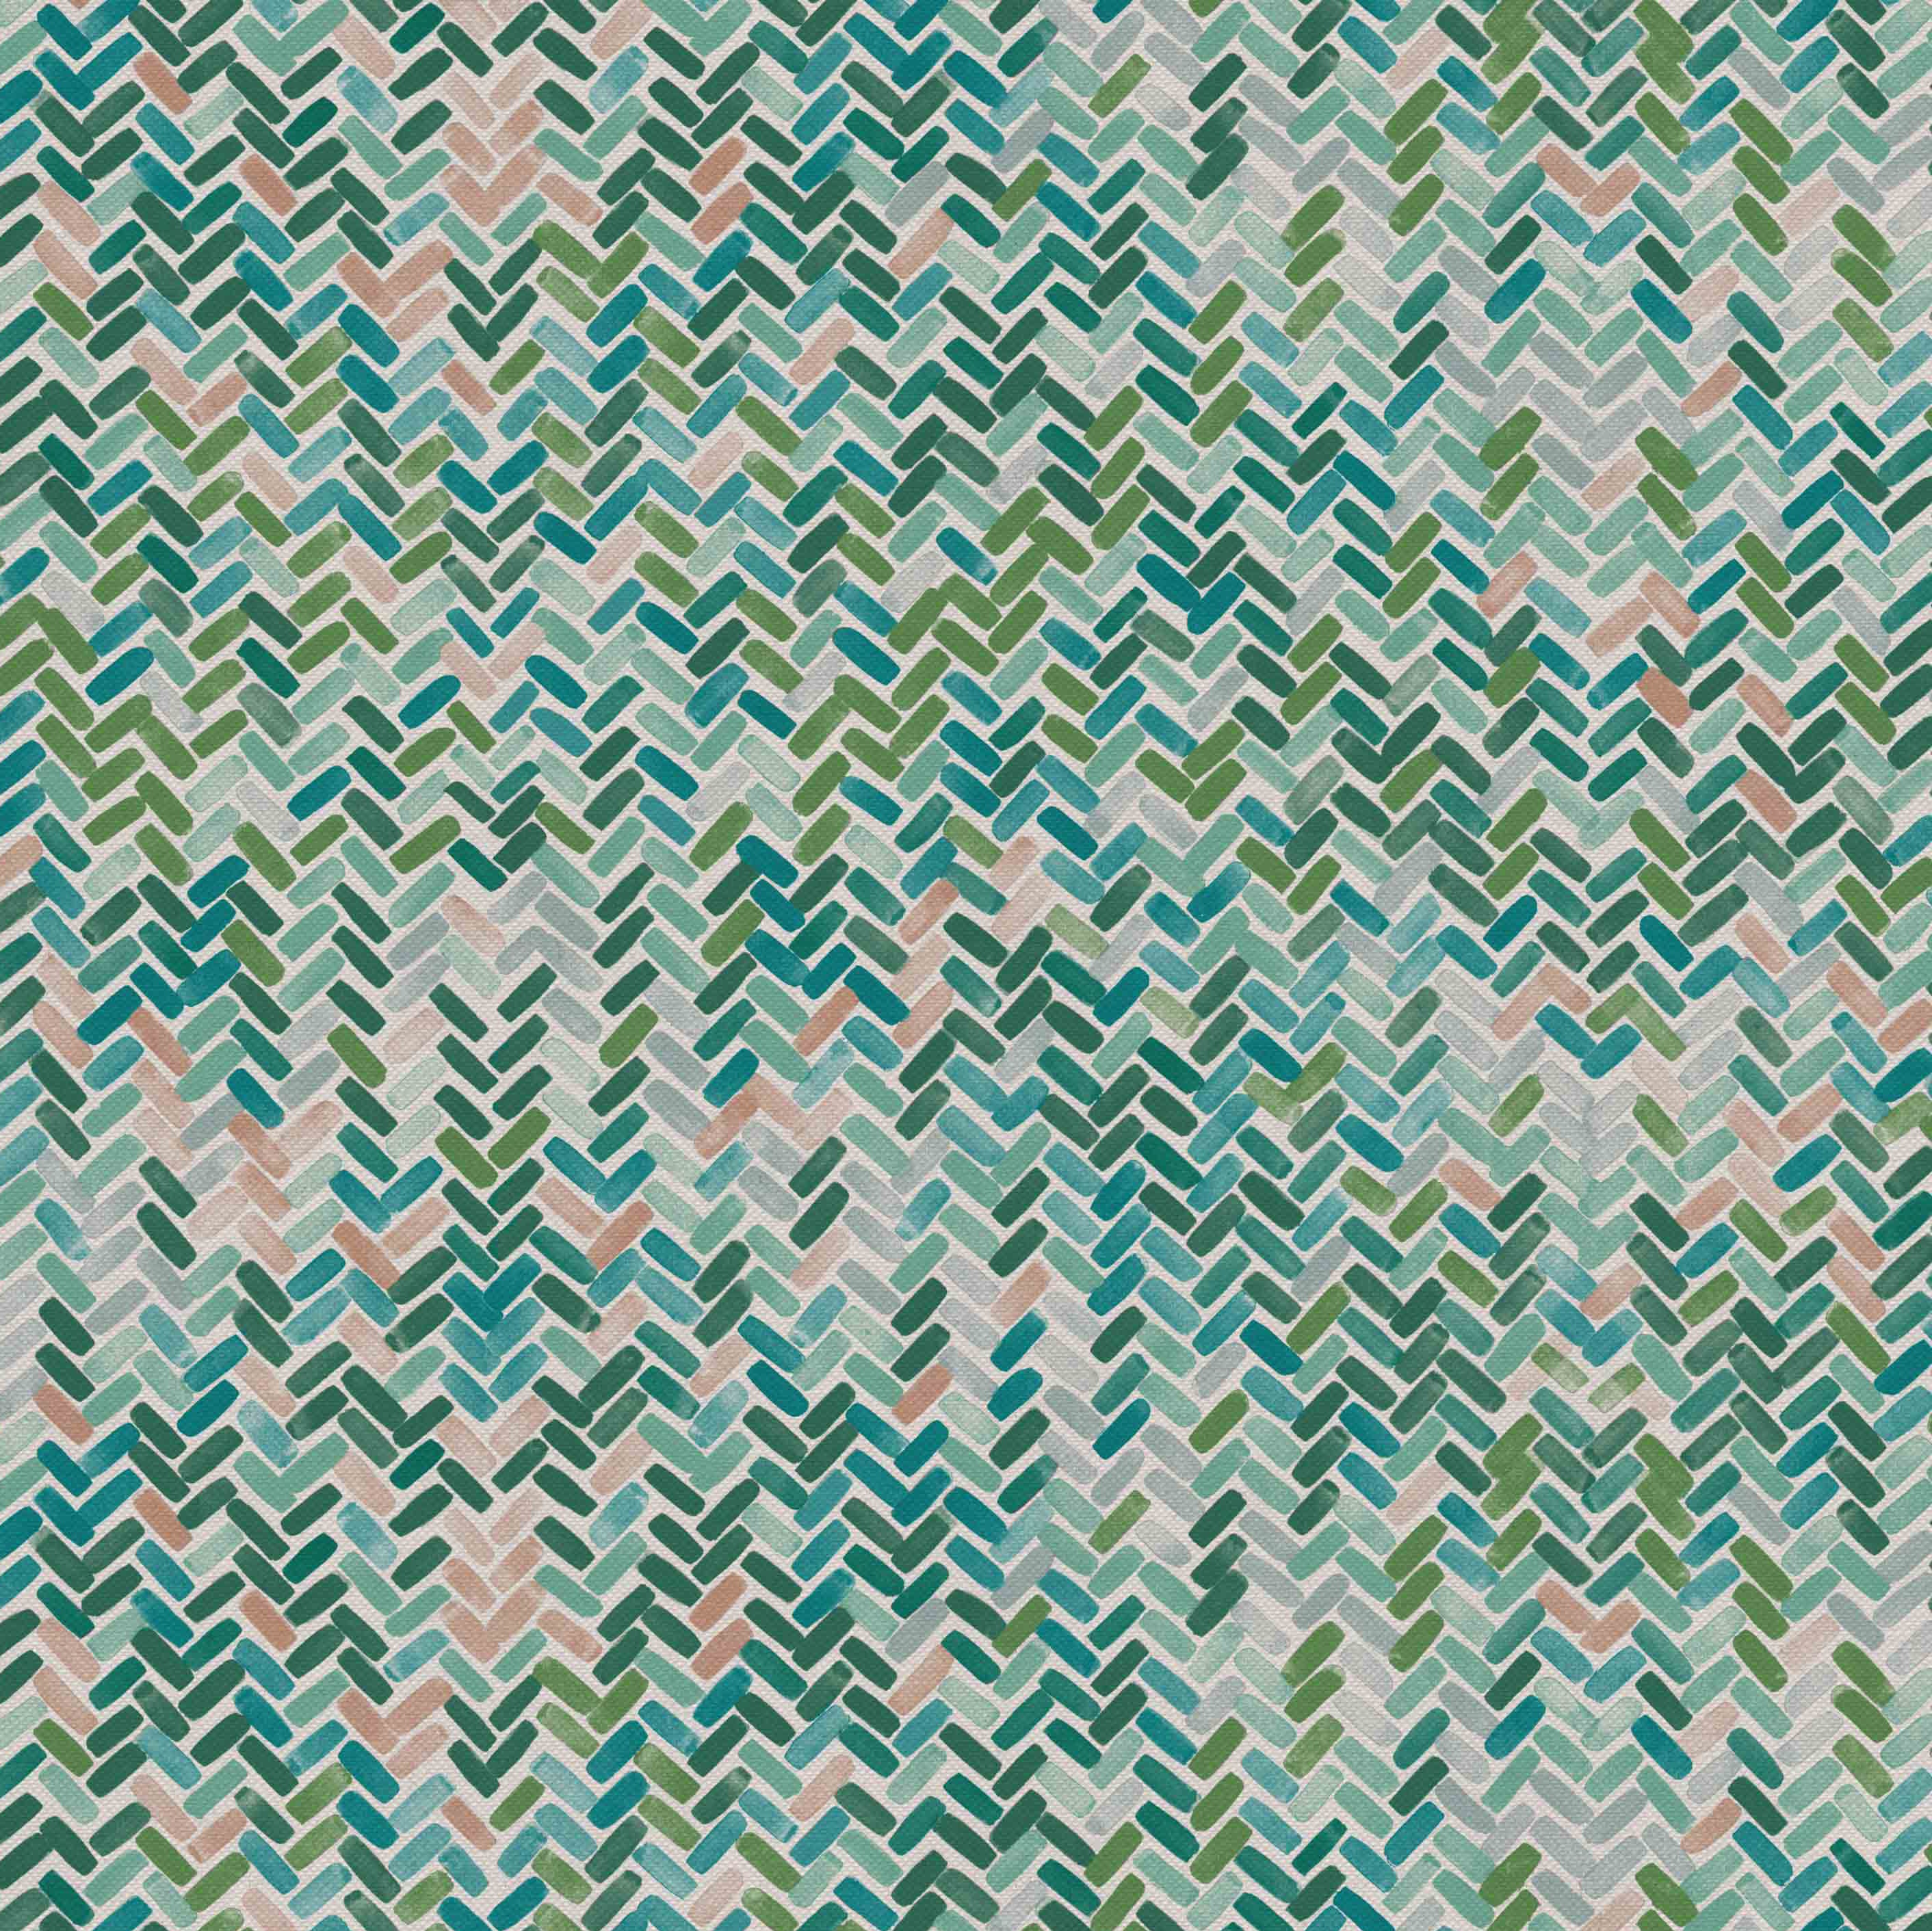 Detail of fabric in a thatched herringbone pattern in shades of pink, blue and green.